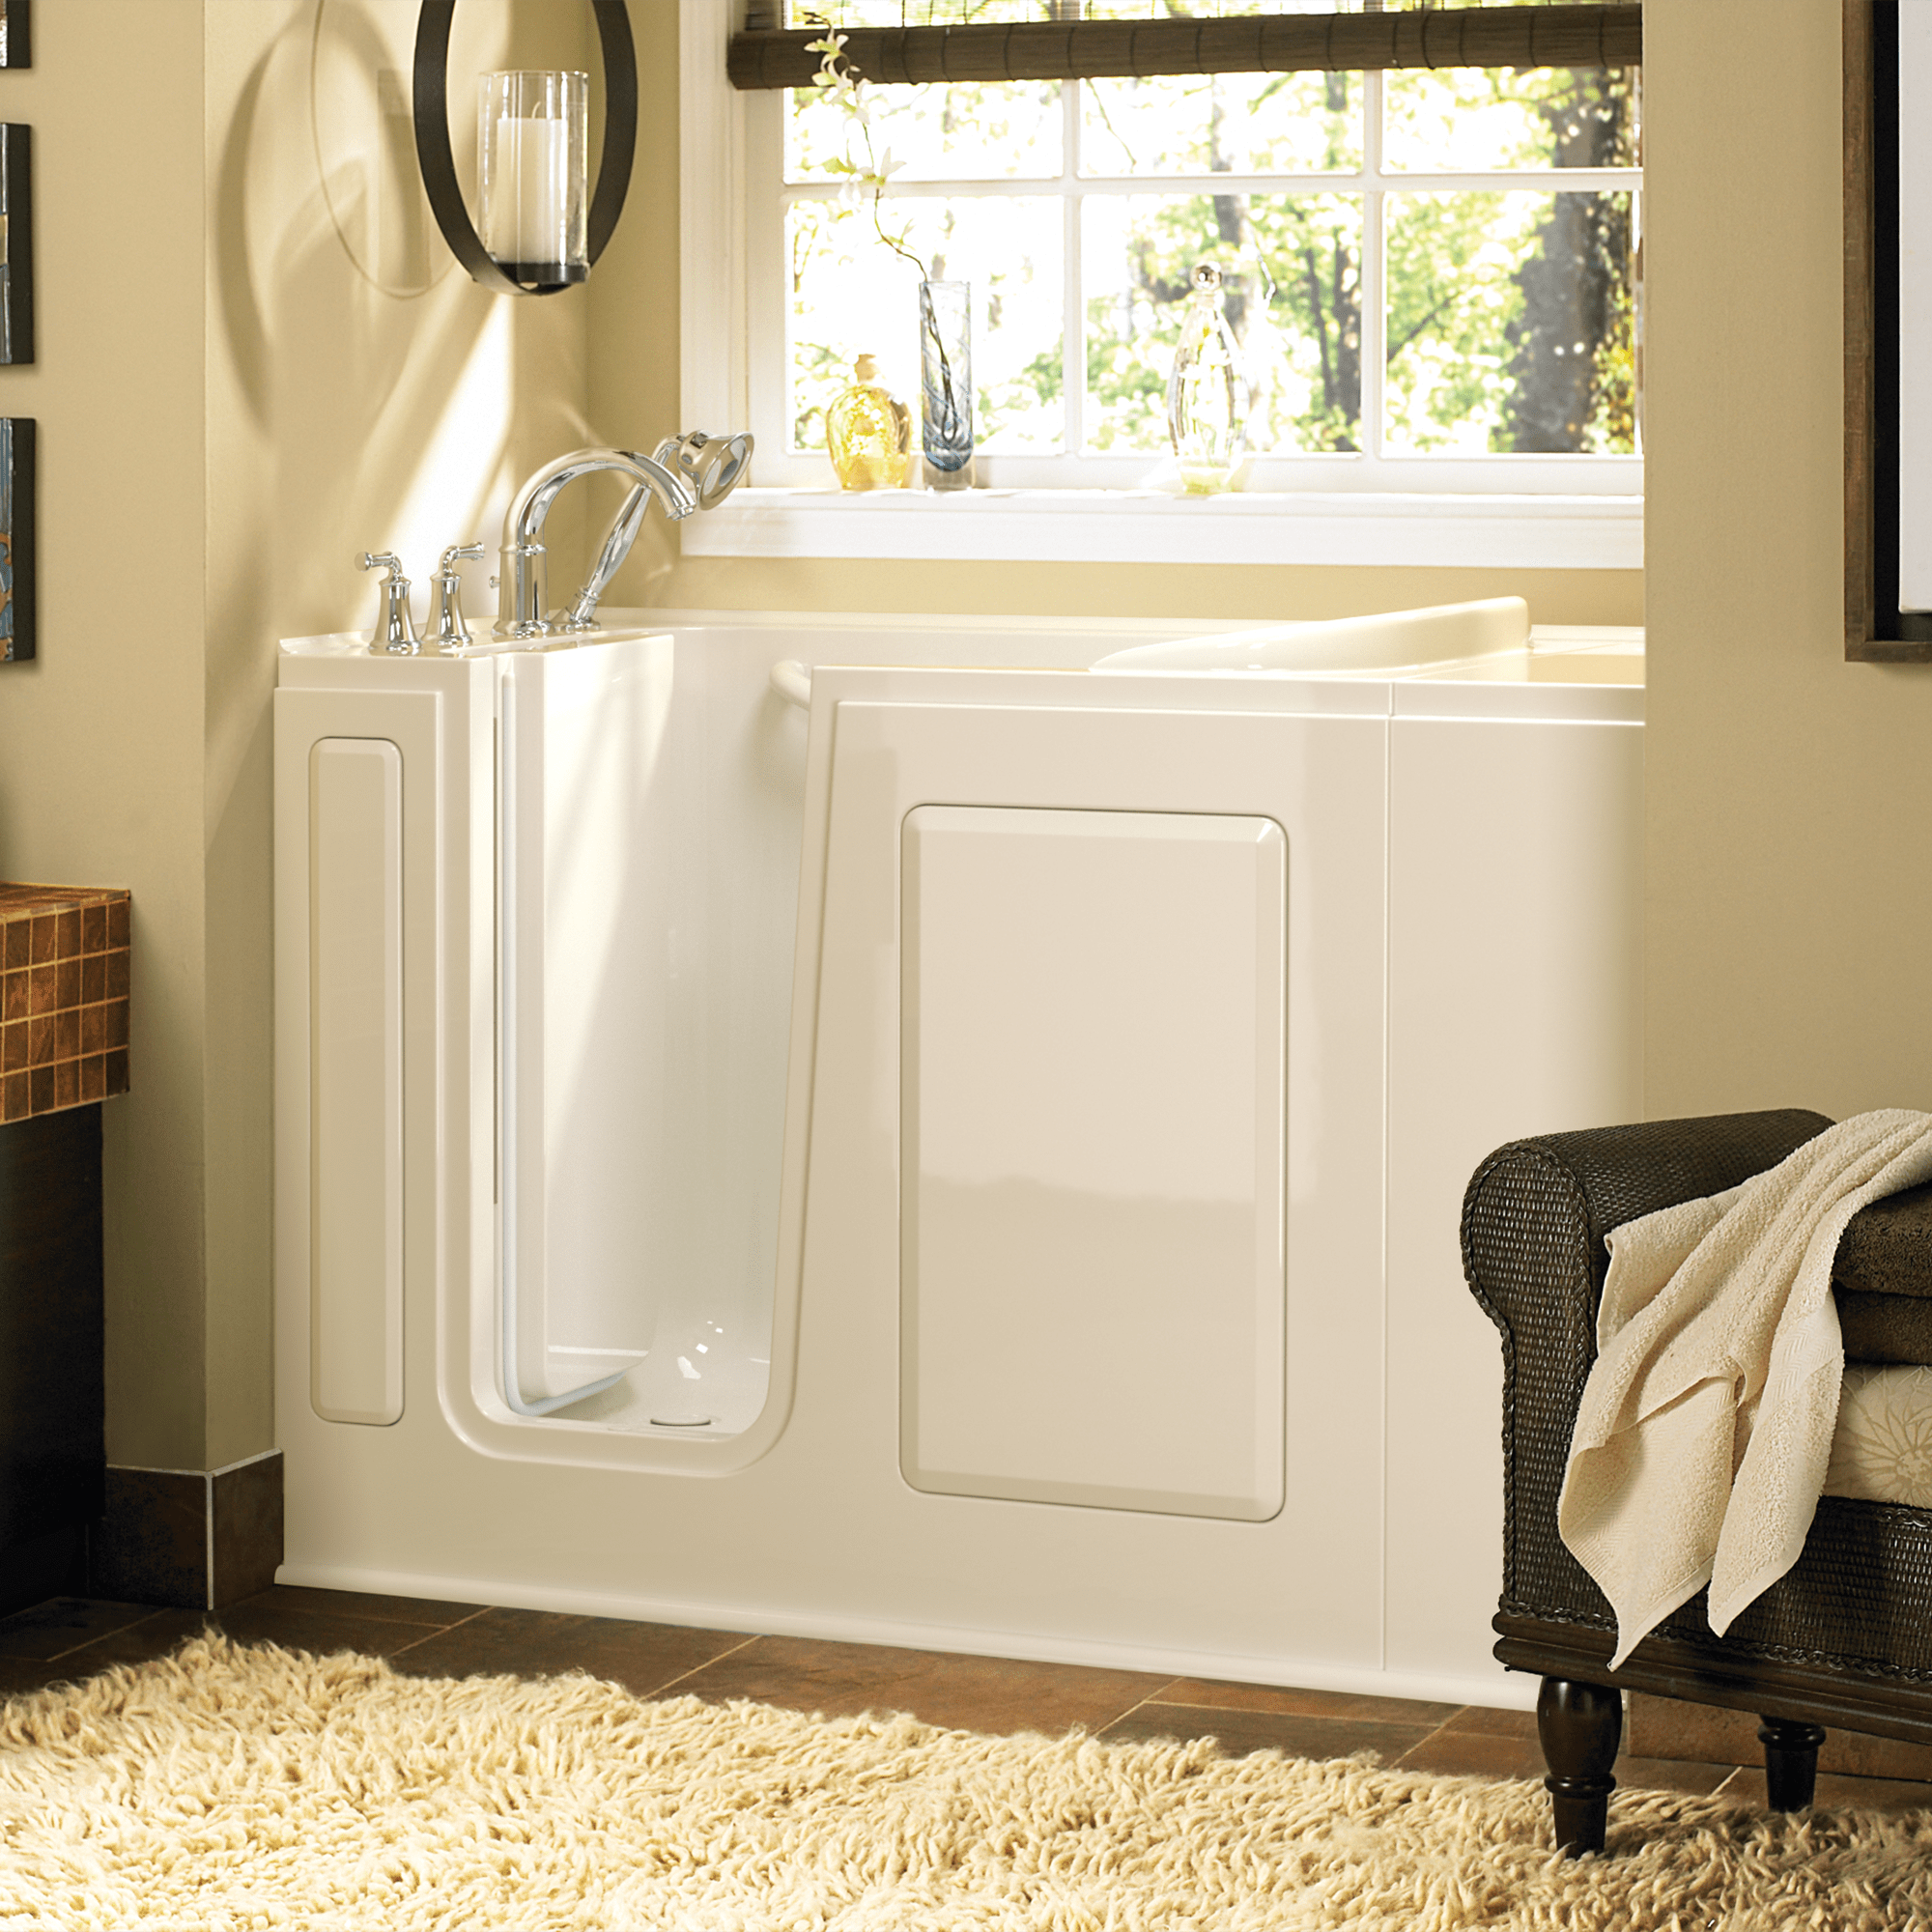 Gelcoat Value Series 28 x 48-Inch Walk-in Tub With Soaker System - Left-Hand Drain With Faucet